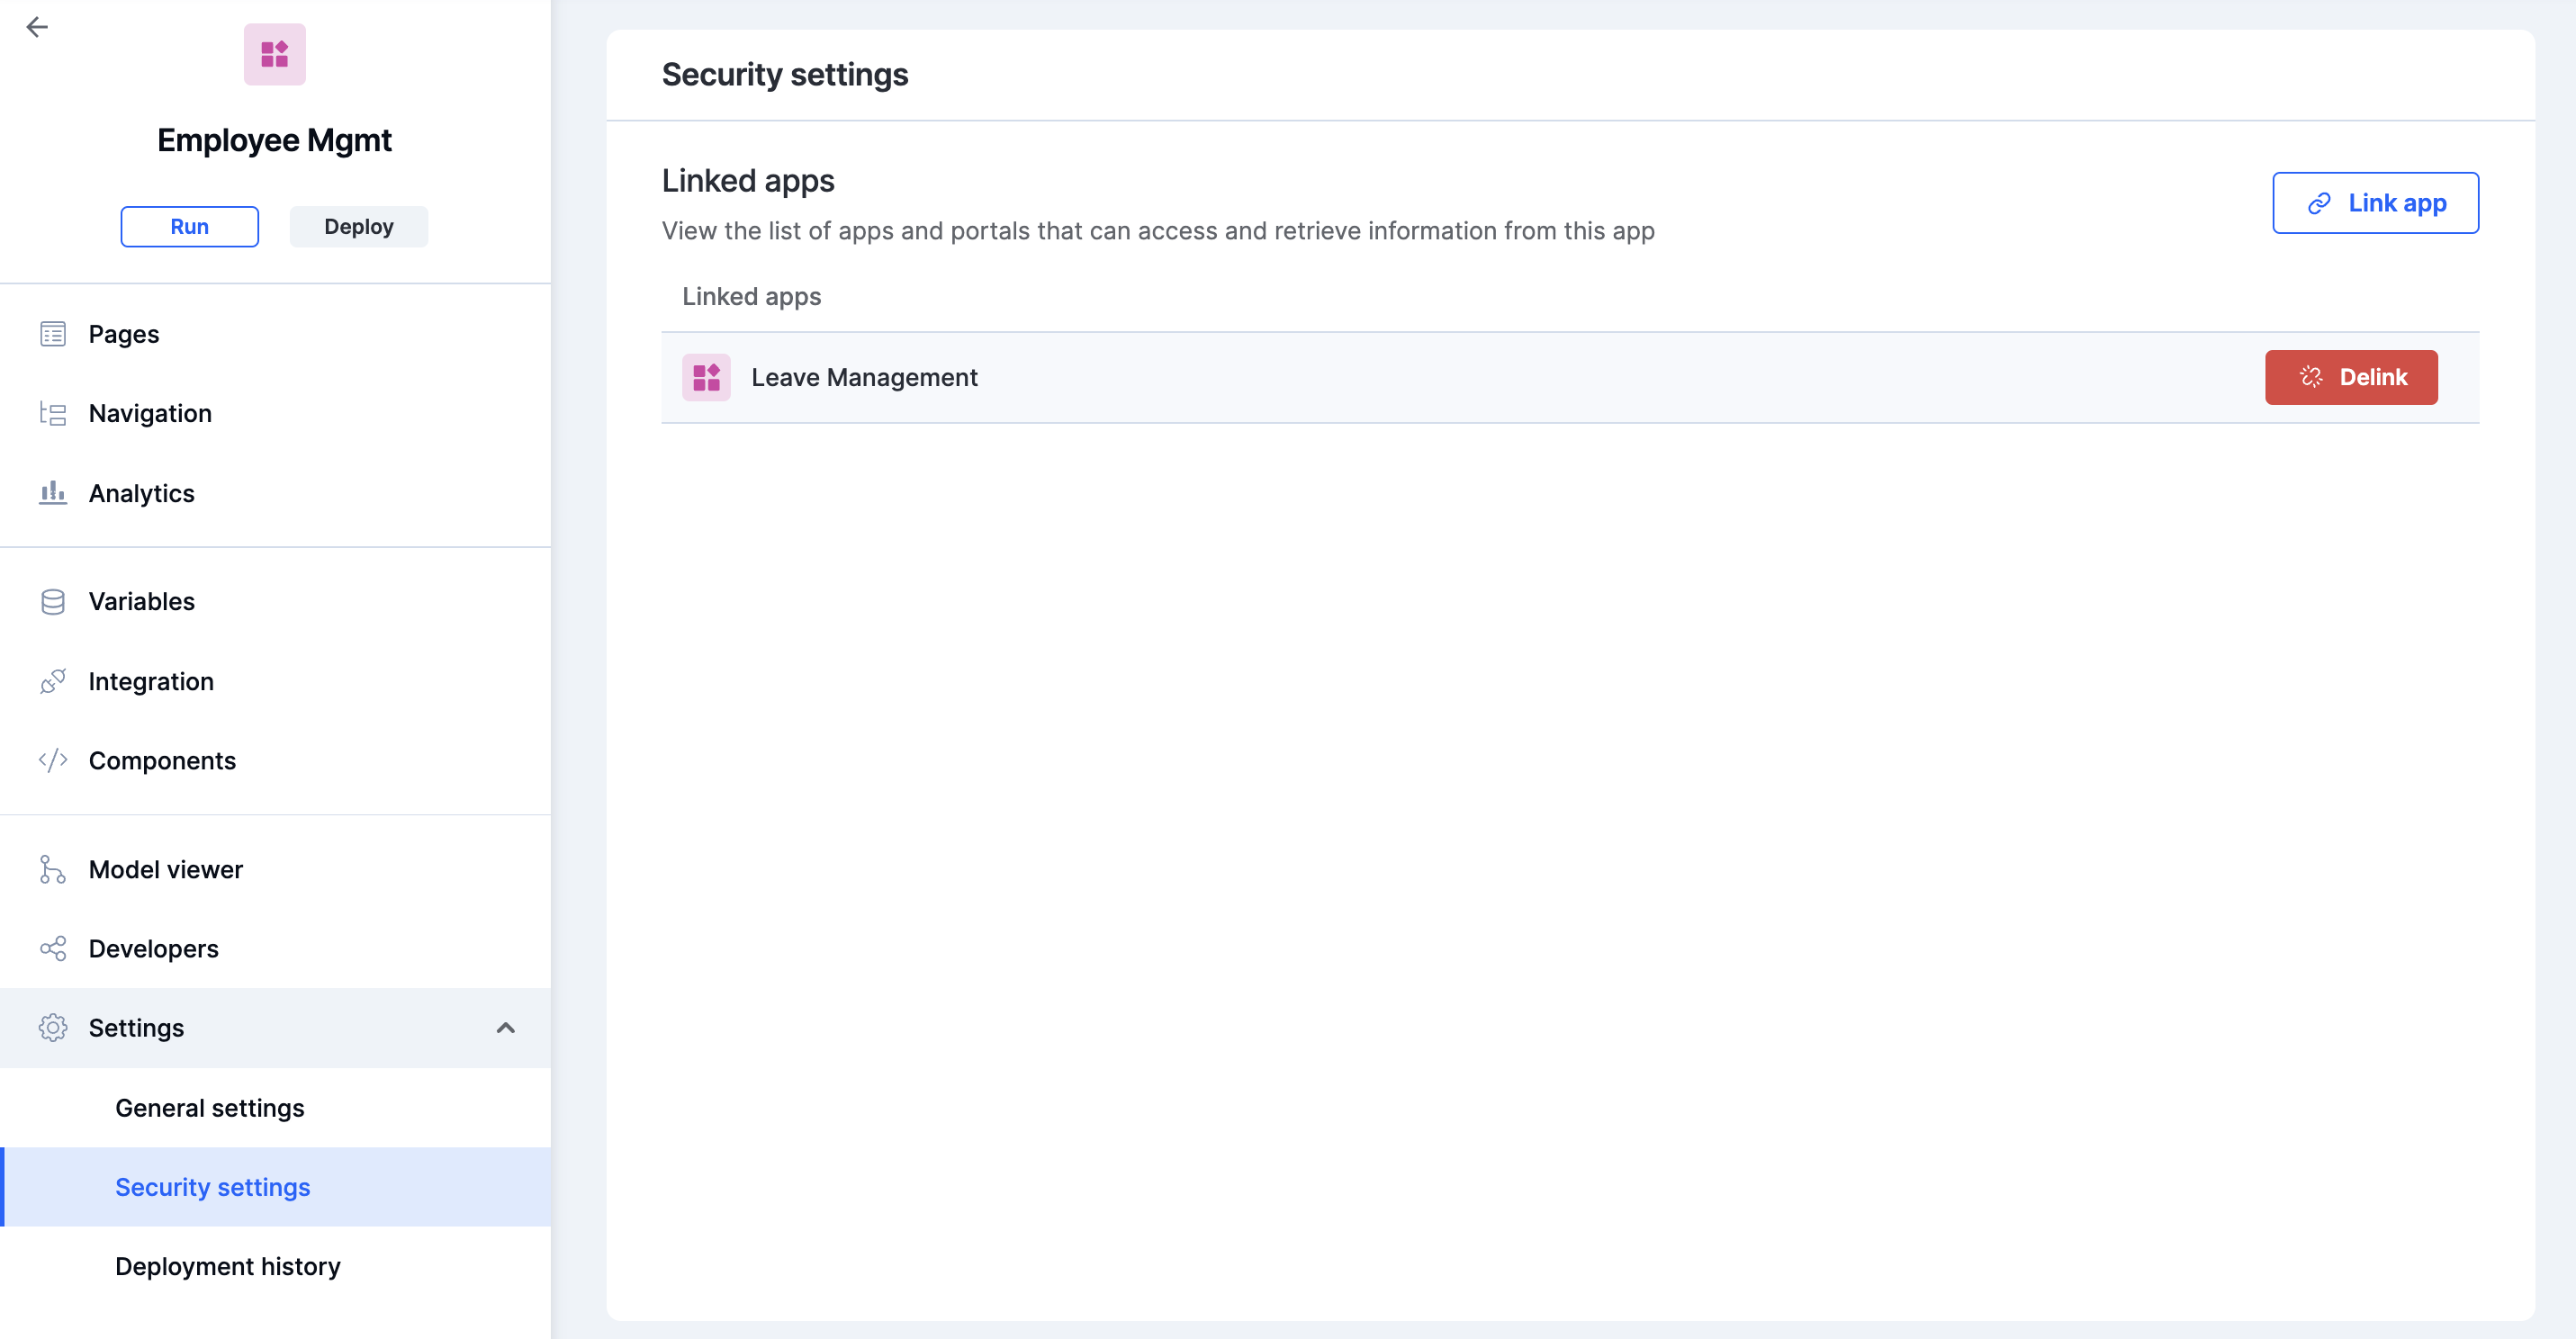 Security settings page with the Delink option highlighted